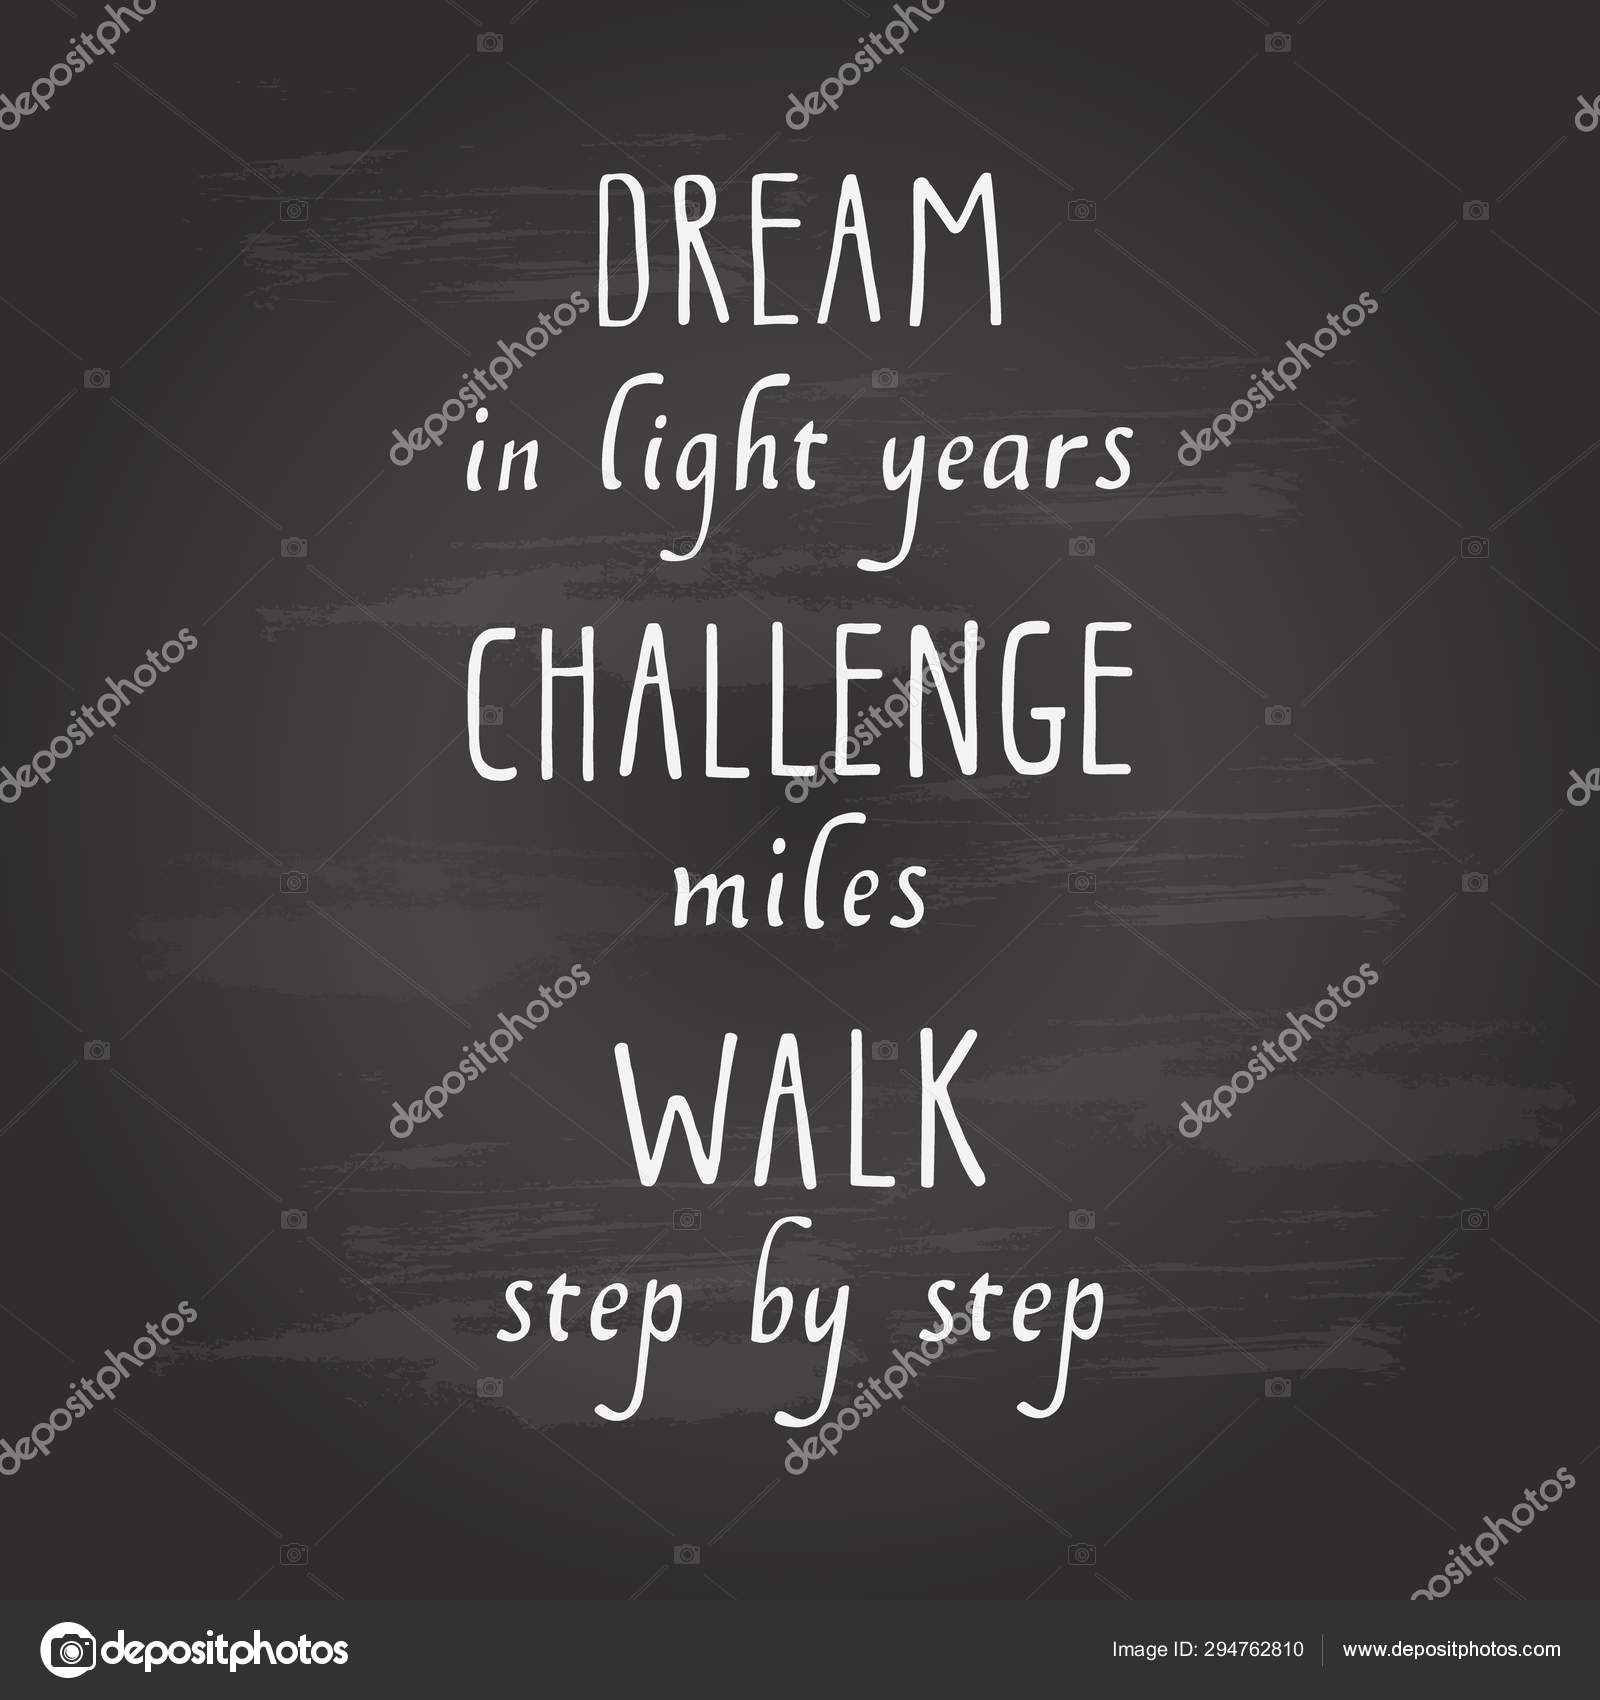 Hand Drawn Vector Lettering Inspirational Quote Shakespeare Citation On Chalkboard Dream In Light Years Challenge Miles Walk Step By Step Vector Image By C Cutelittlethings Vector Stock 294762810